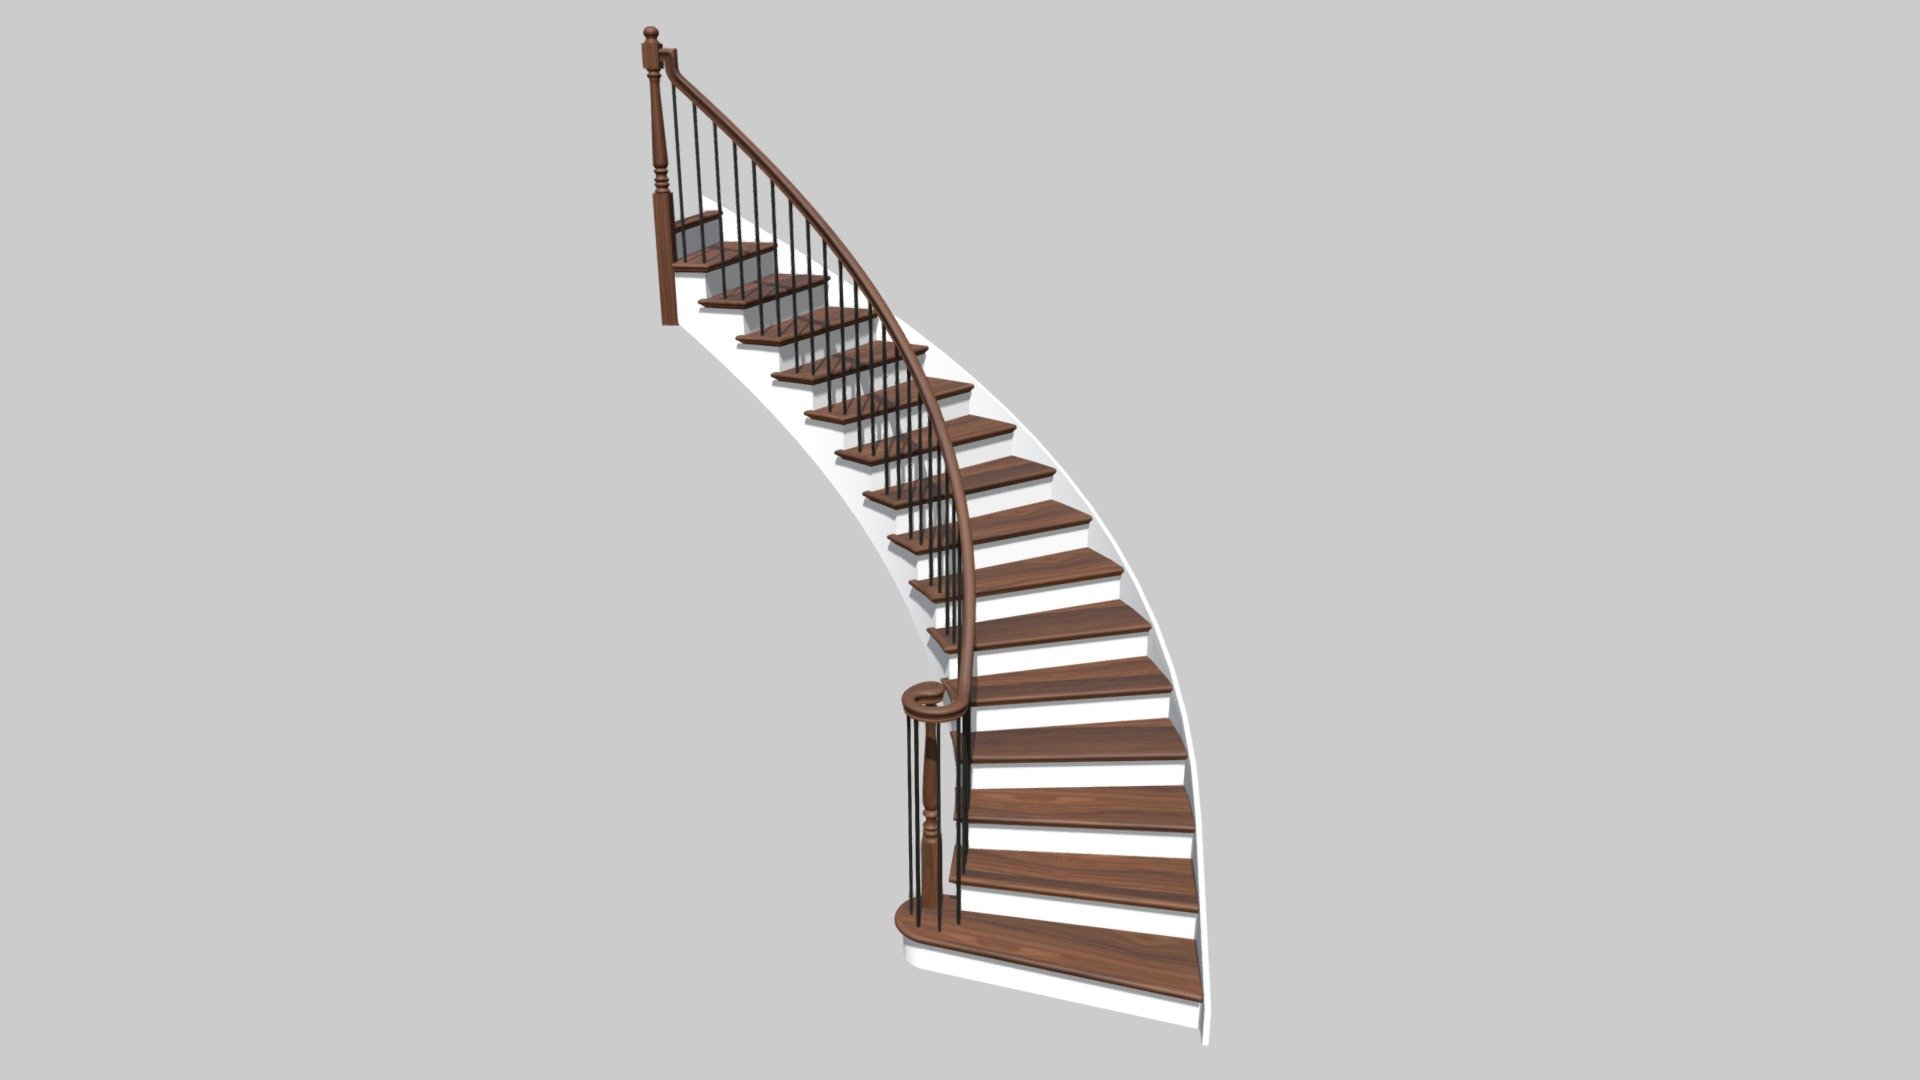 Example of circular stair with 90 degree turn and angled start - Circular stair - 90 degree with angled start - 3D model by designedstairs 3d model